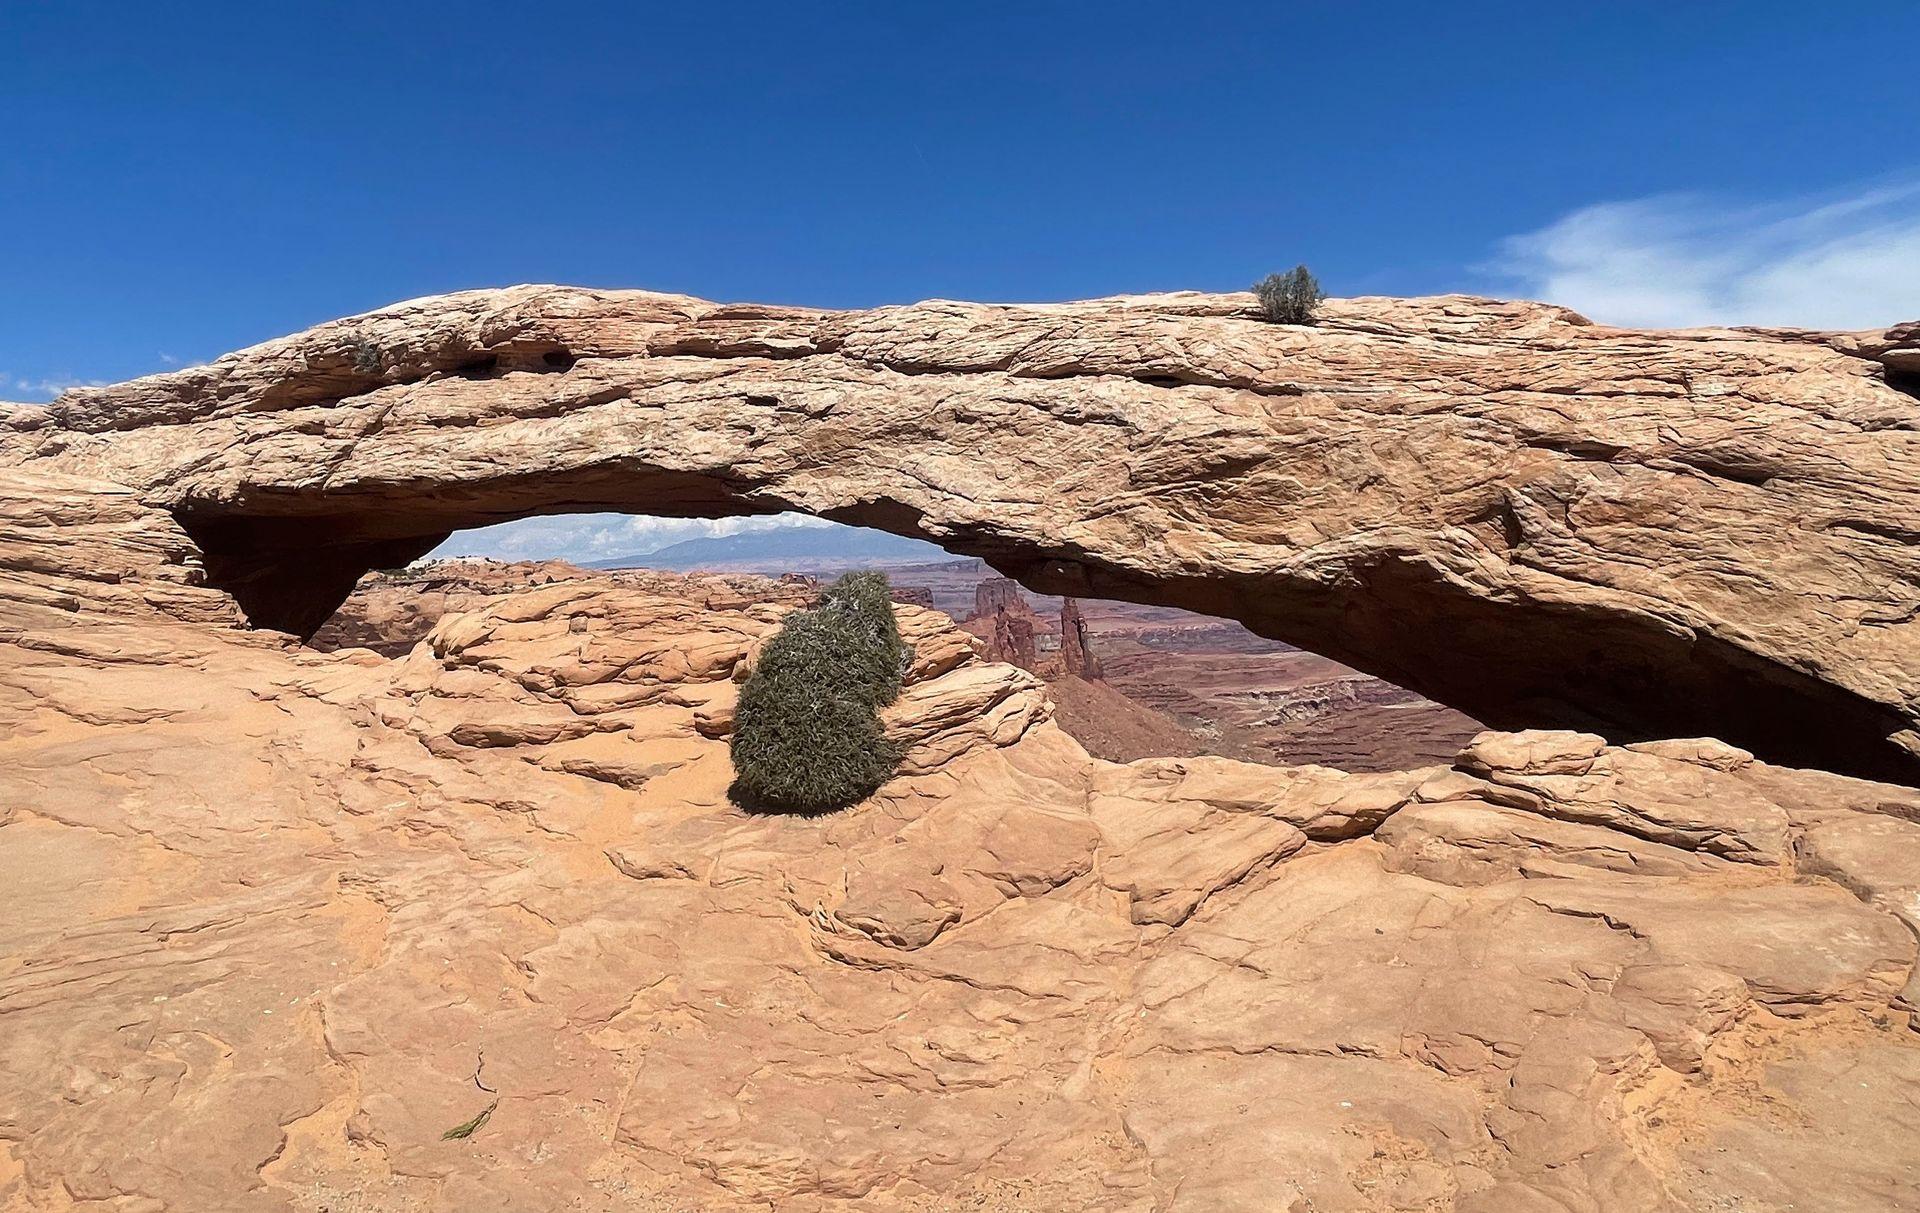 A view of Mesa Arch in Canyonlands National Park.